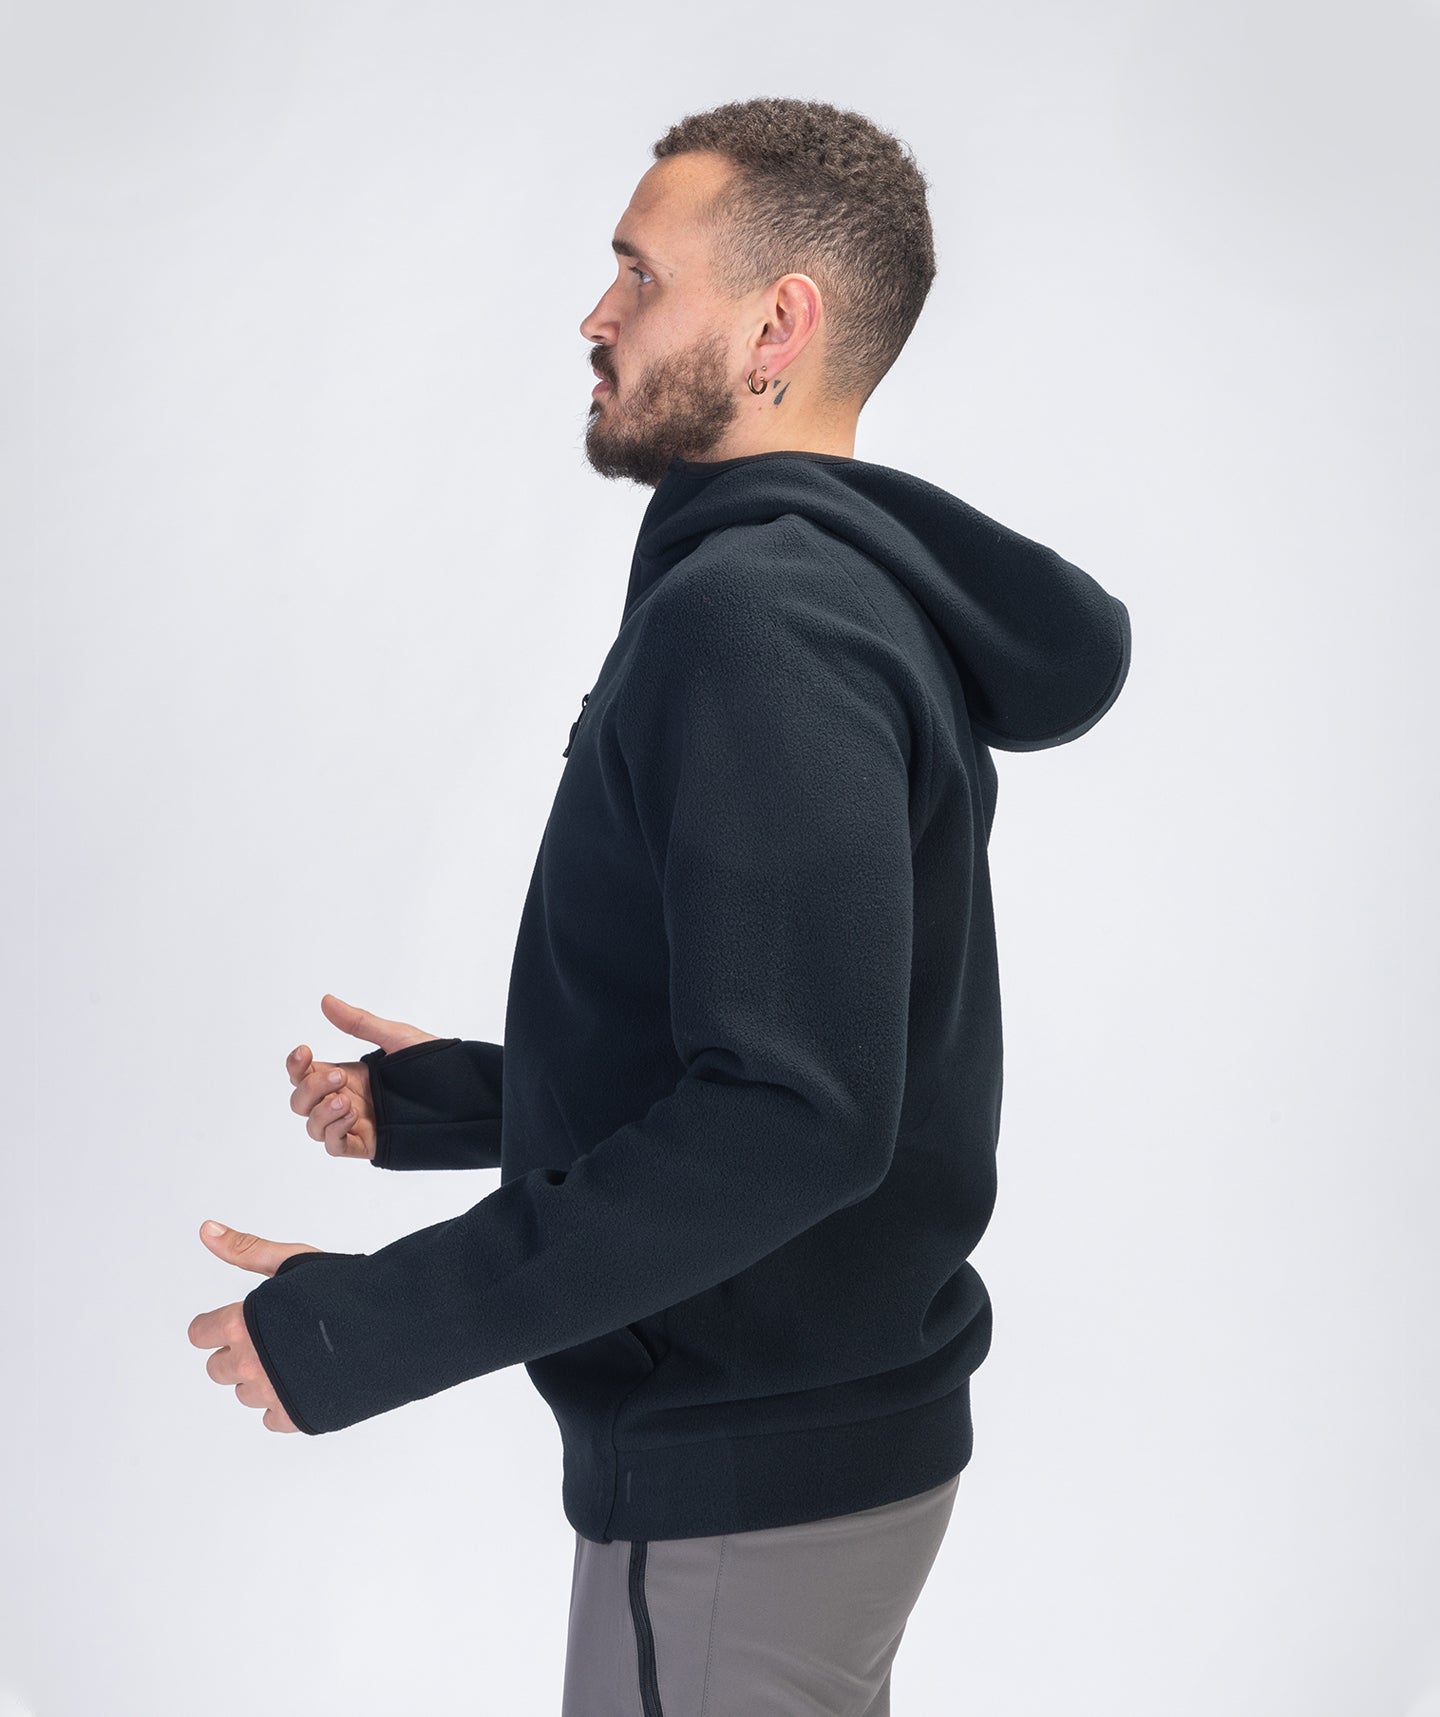 This hoodie is a popular choice among men looking for a high-quality, stylish option.